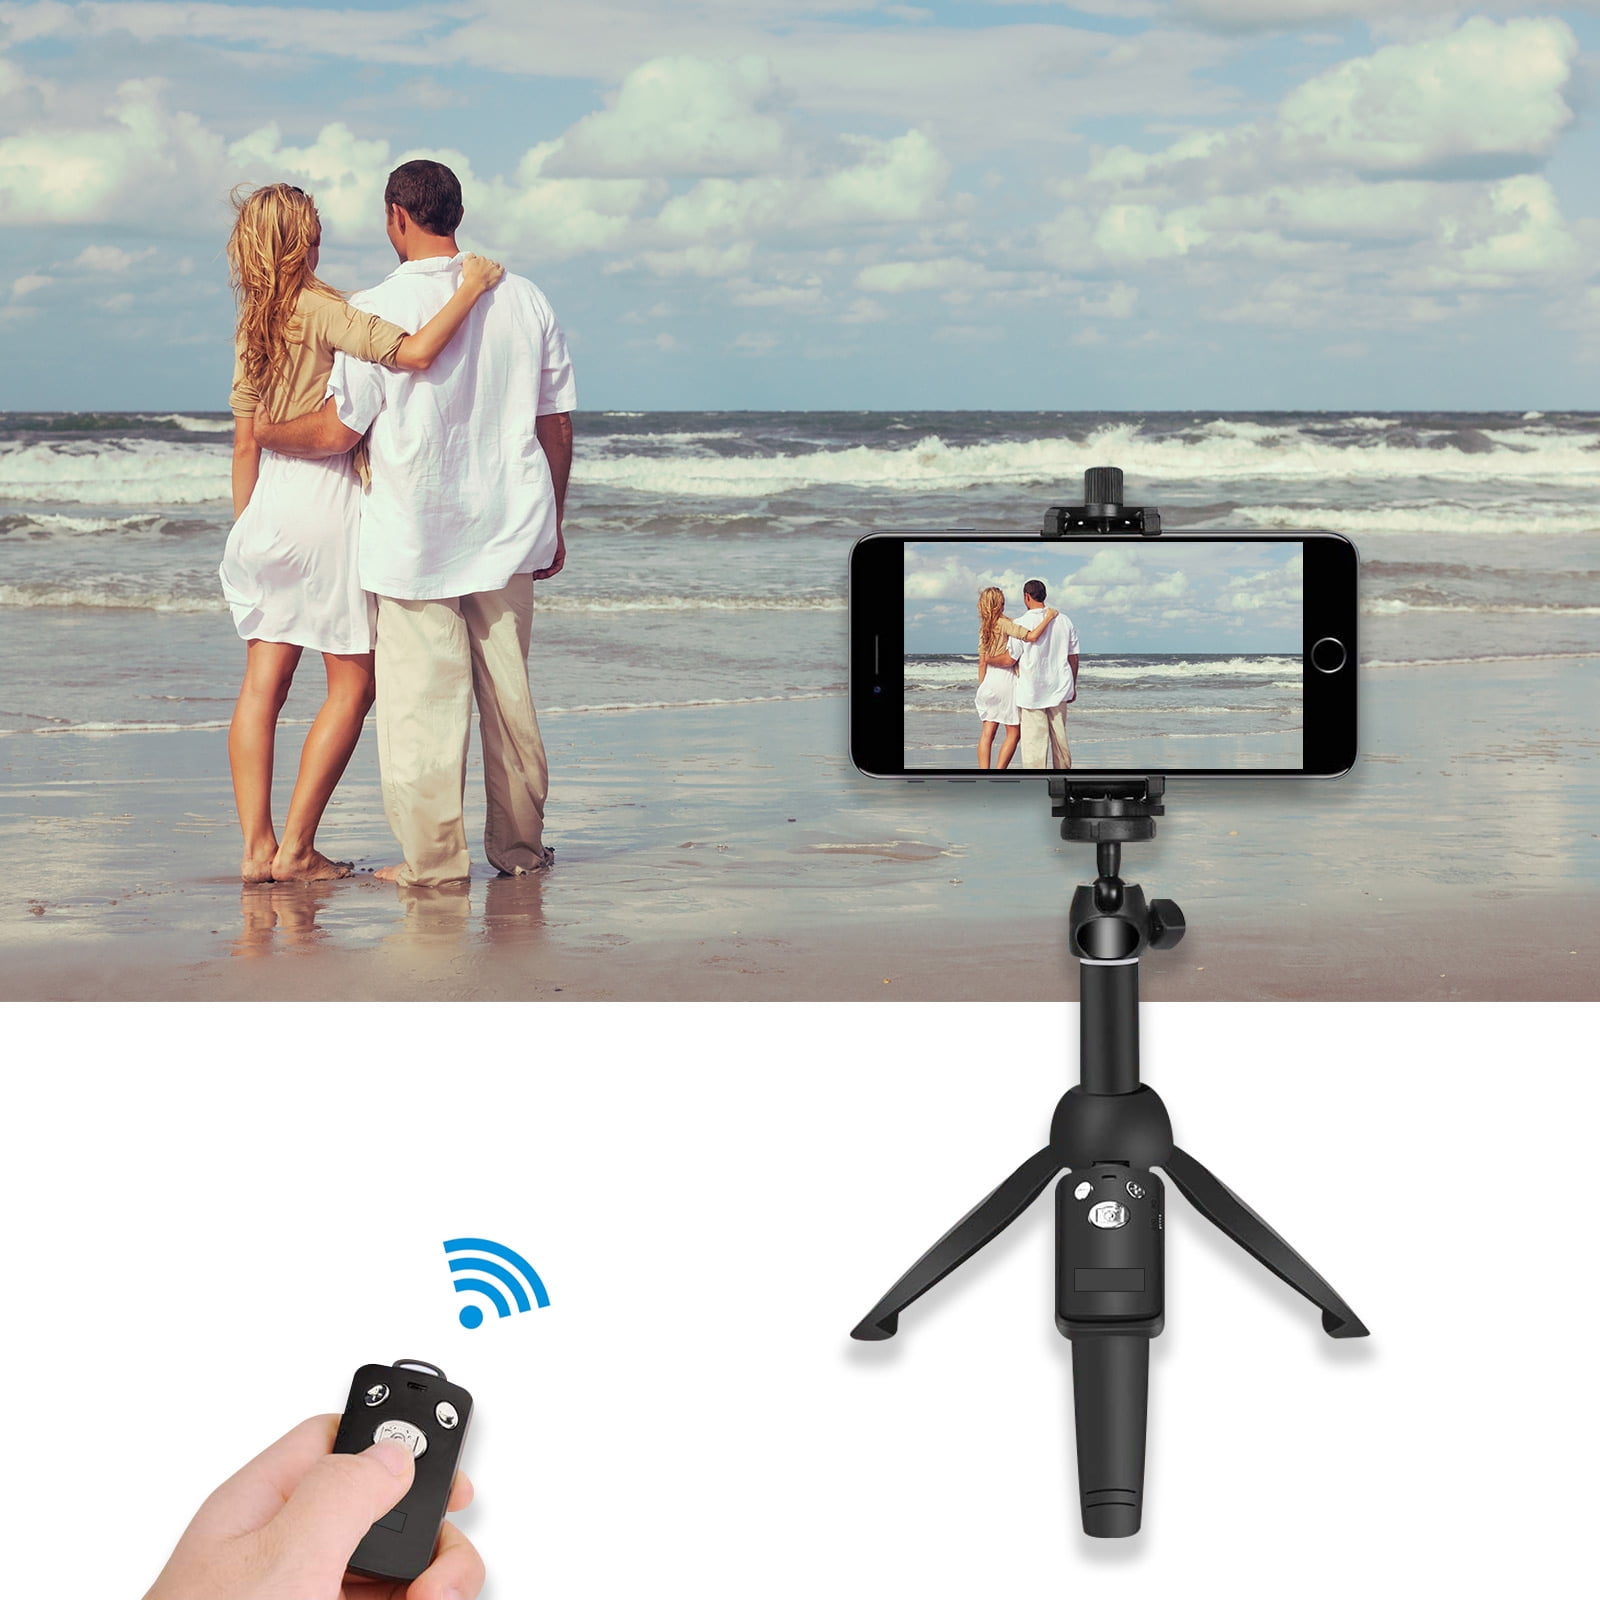 Newringo Selfie Stick Tripod with Fill Light,40 Extendable Cell Phone Tripod Stand,with Wireless Remote,Aluminum,Portable All in One Phone Holder,Compatible with iPhone Android Phones 